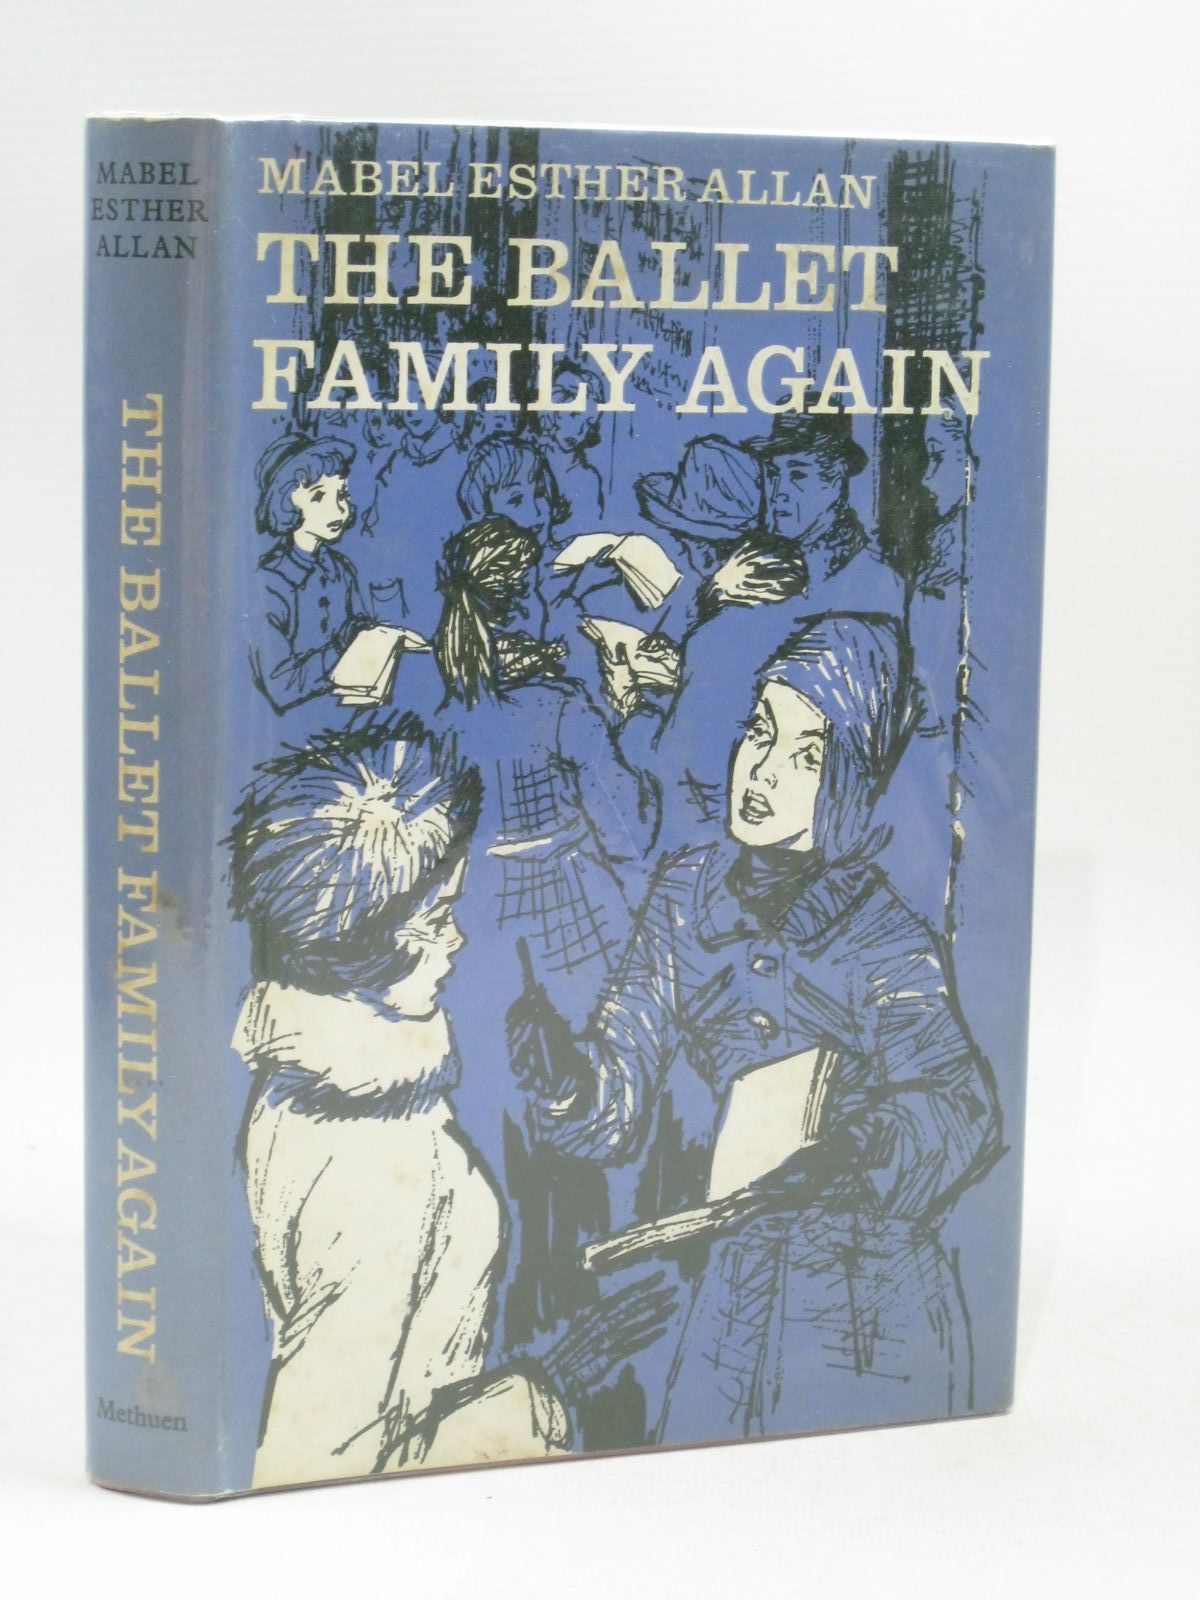 Cover of THE BALLET FAMILY AGAIN by Mabel Esther Allan